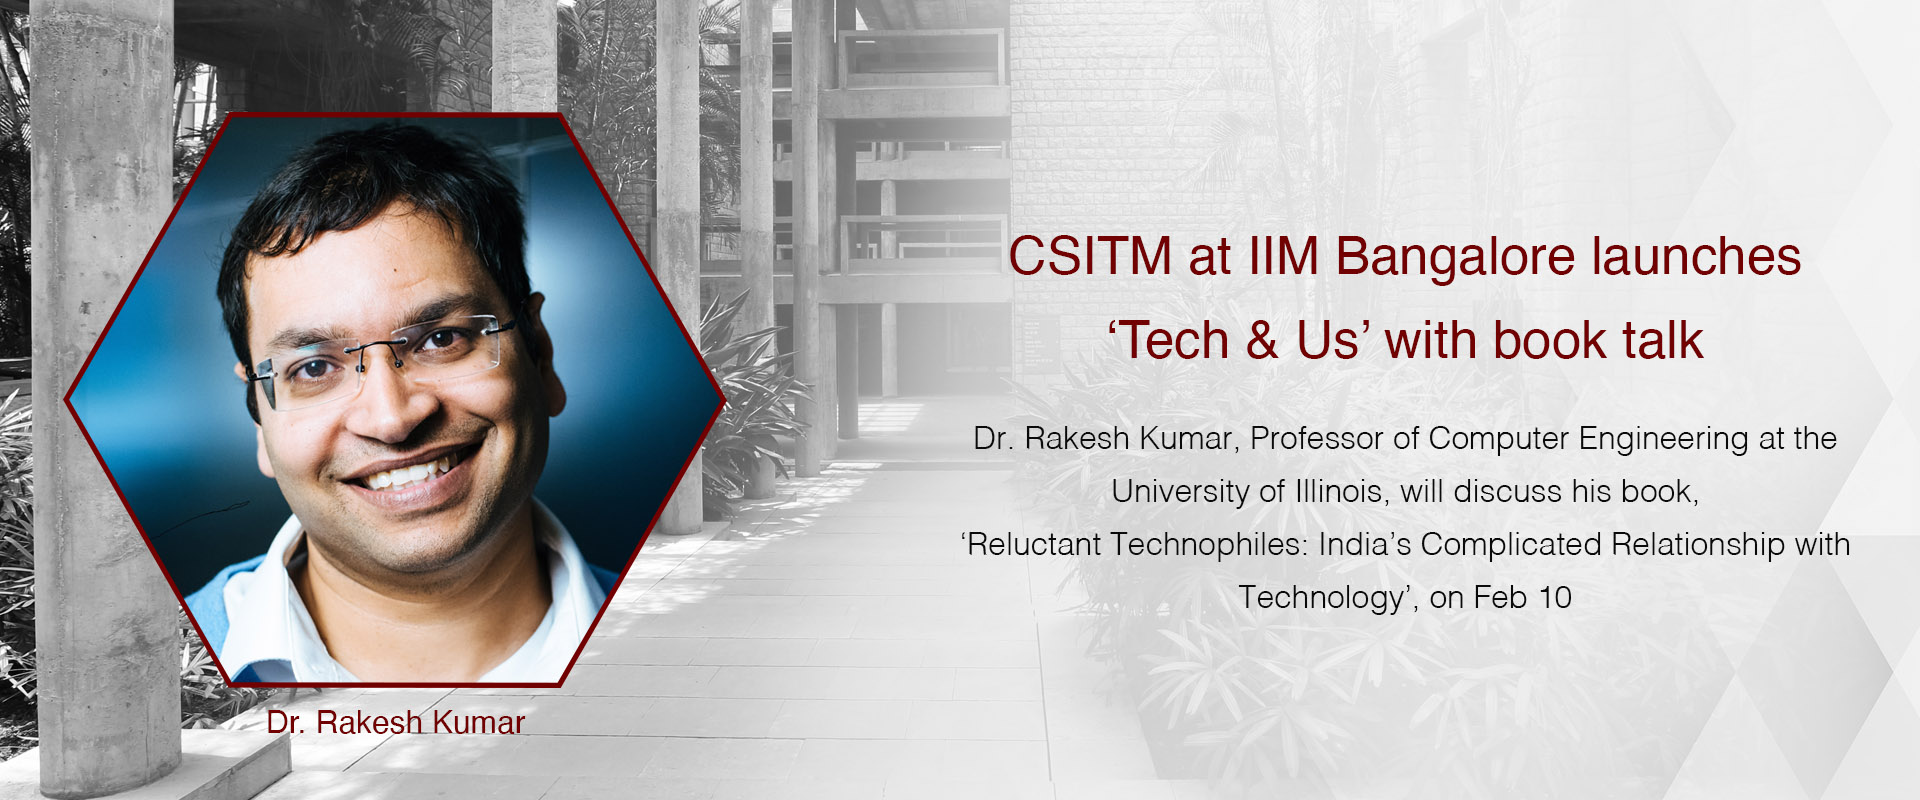 CSITM at IIM Bangalore launches ‘Tech & Us’ with book talk